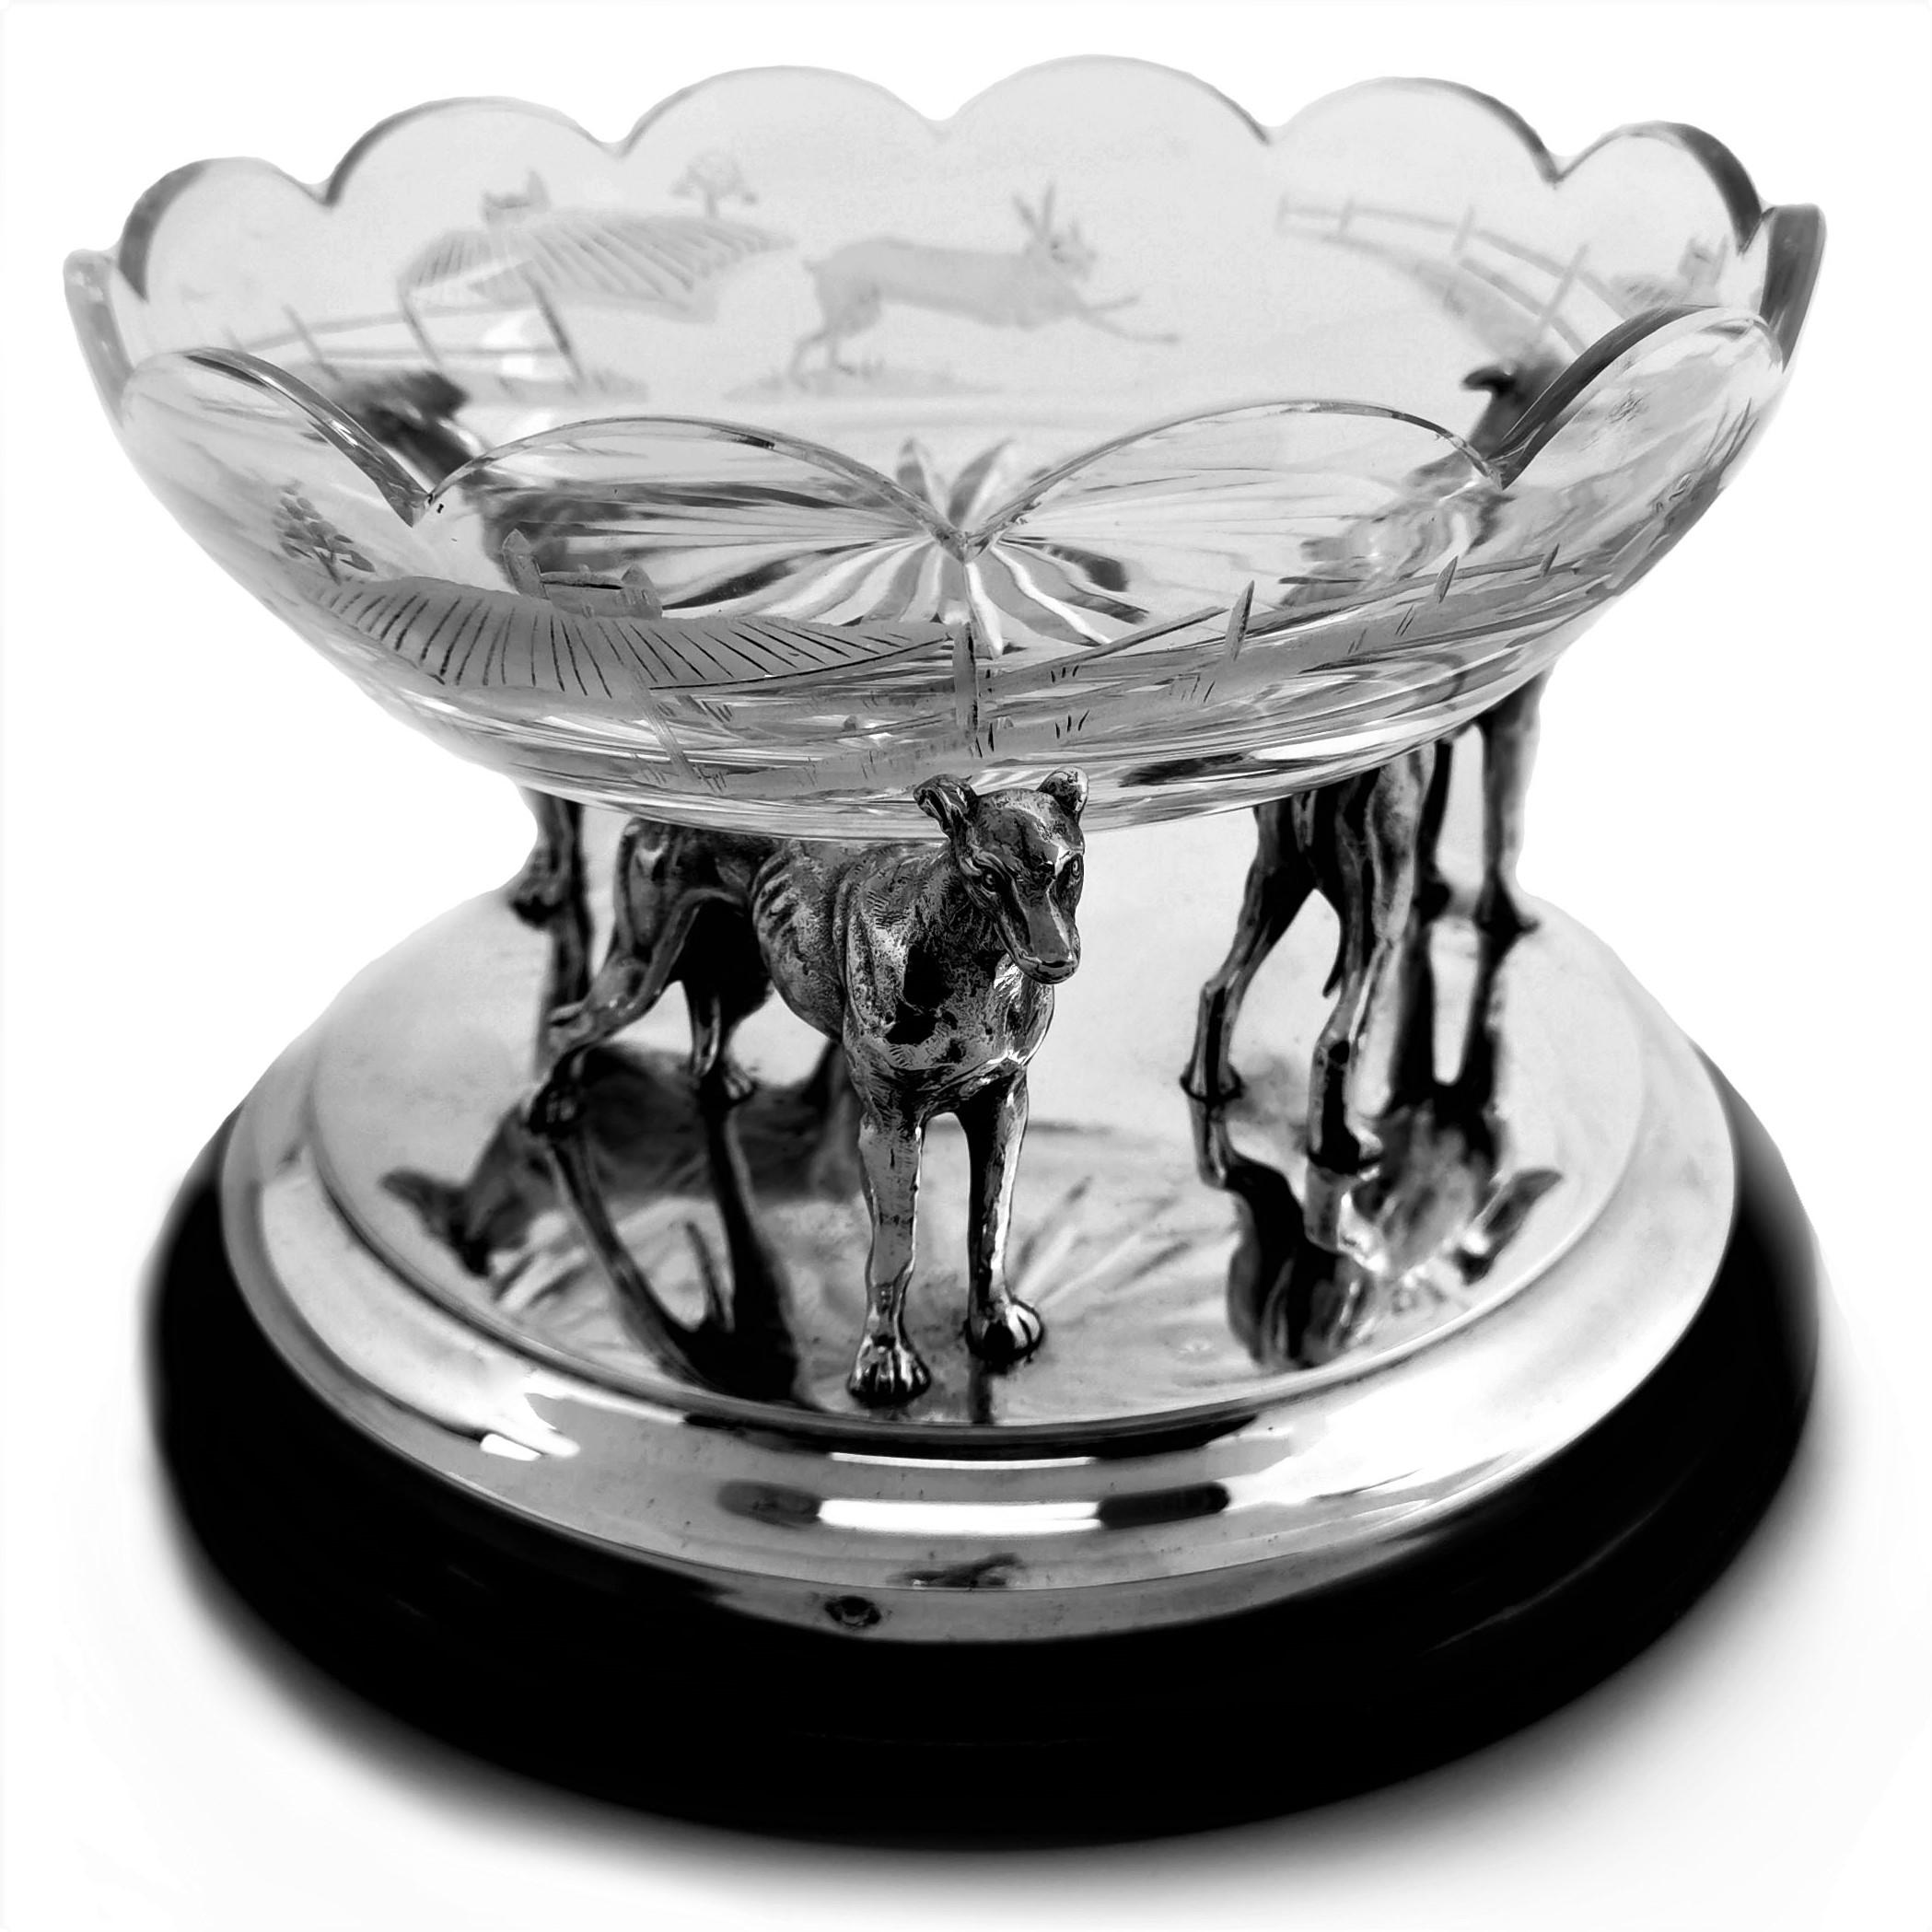 A gorgeous vintage solid Silver model of three Greyhounds standing on a circular silver base on a black circular plinth with an elegant clear class etched bowl resting on the greyhounds. Each Greyhound Faces outward in different directions making a